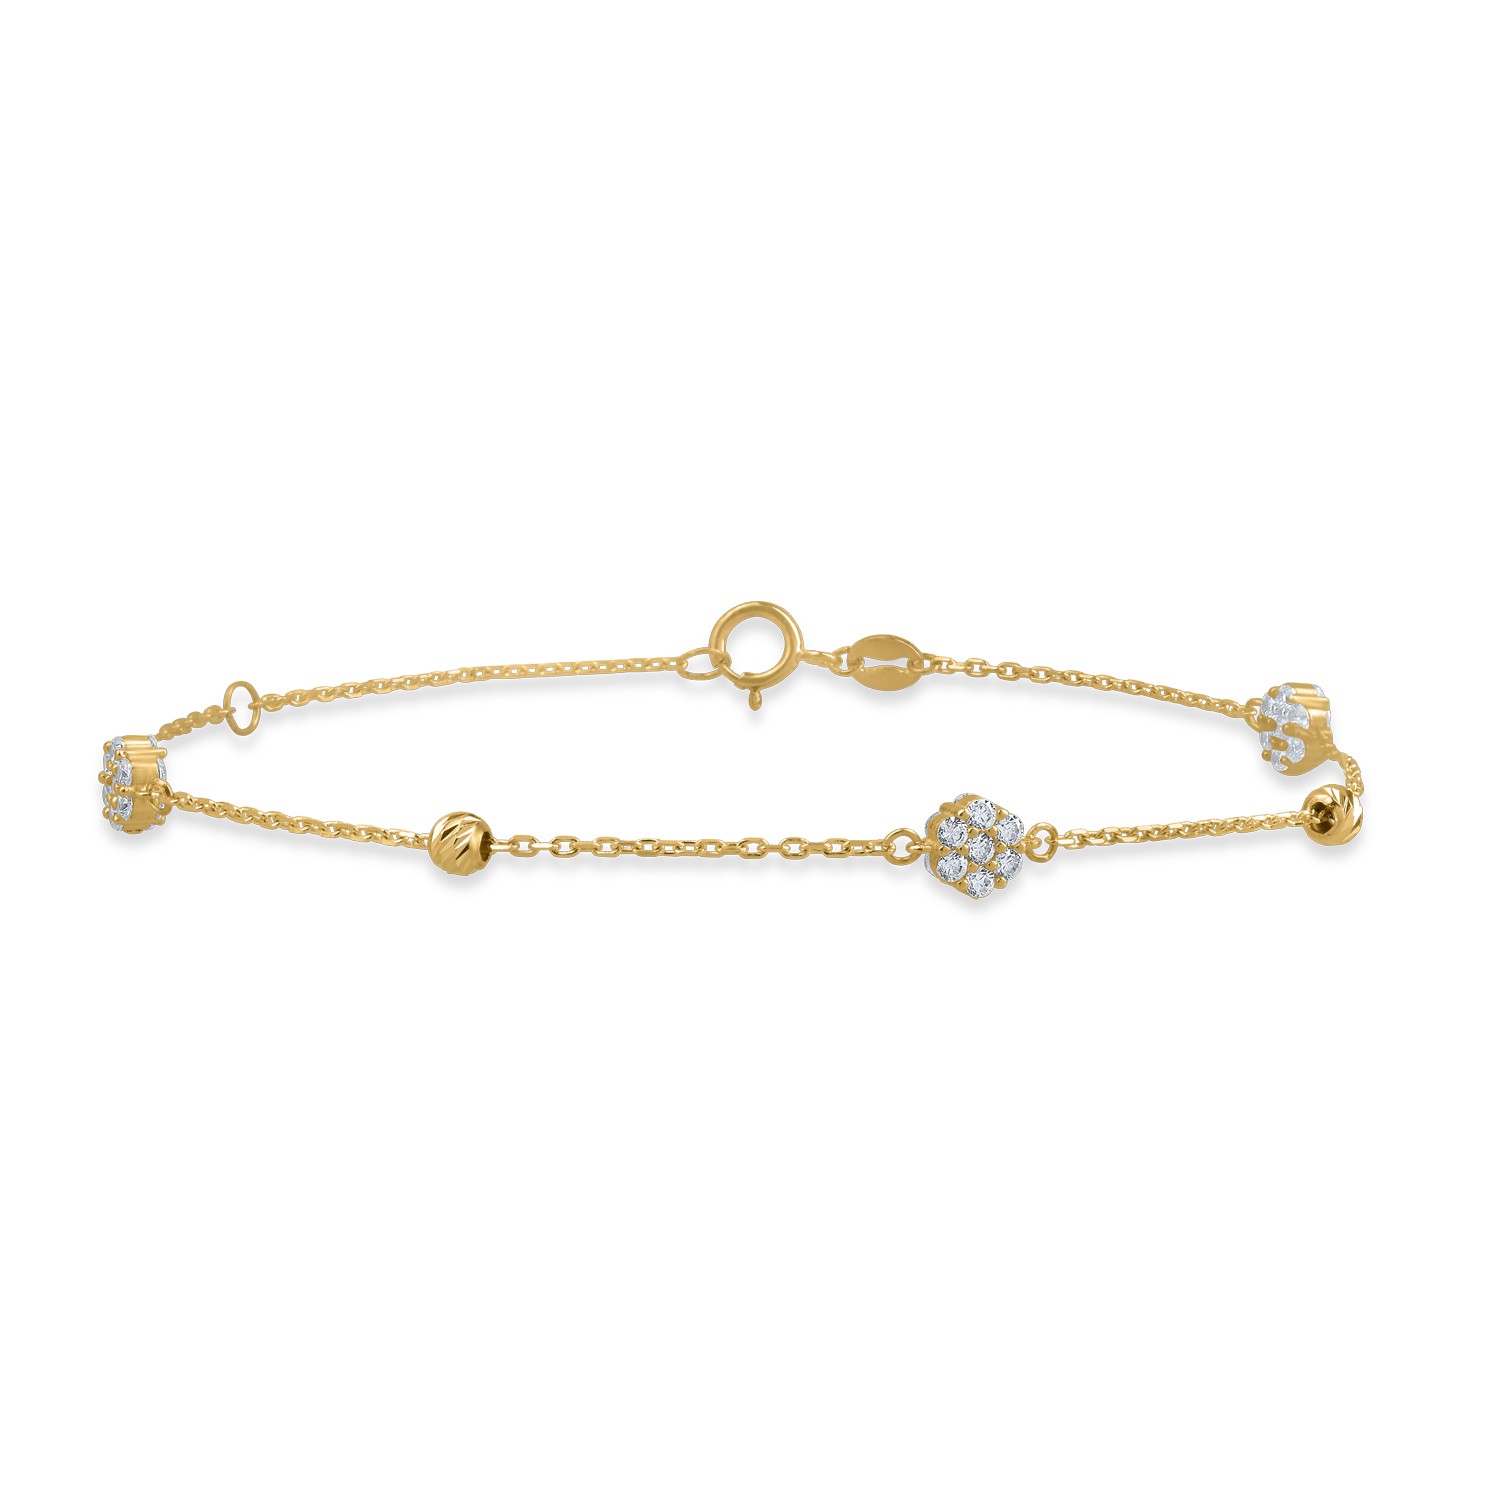 Yellow gold bracelet with beads and flower pendants